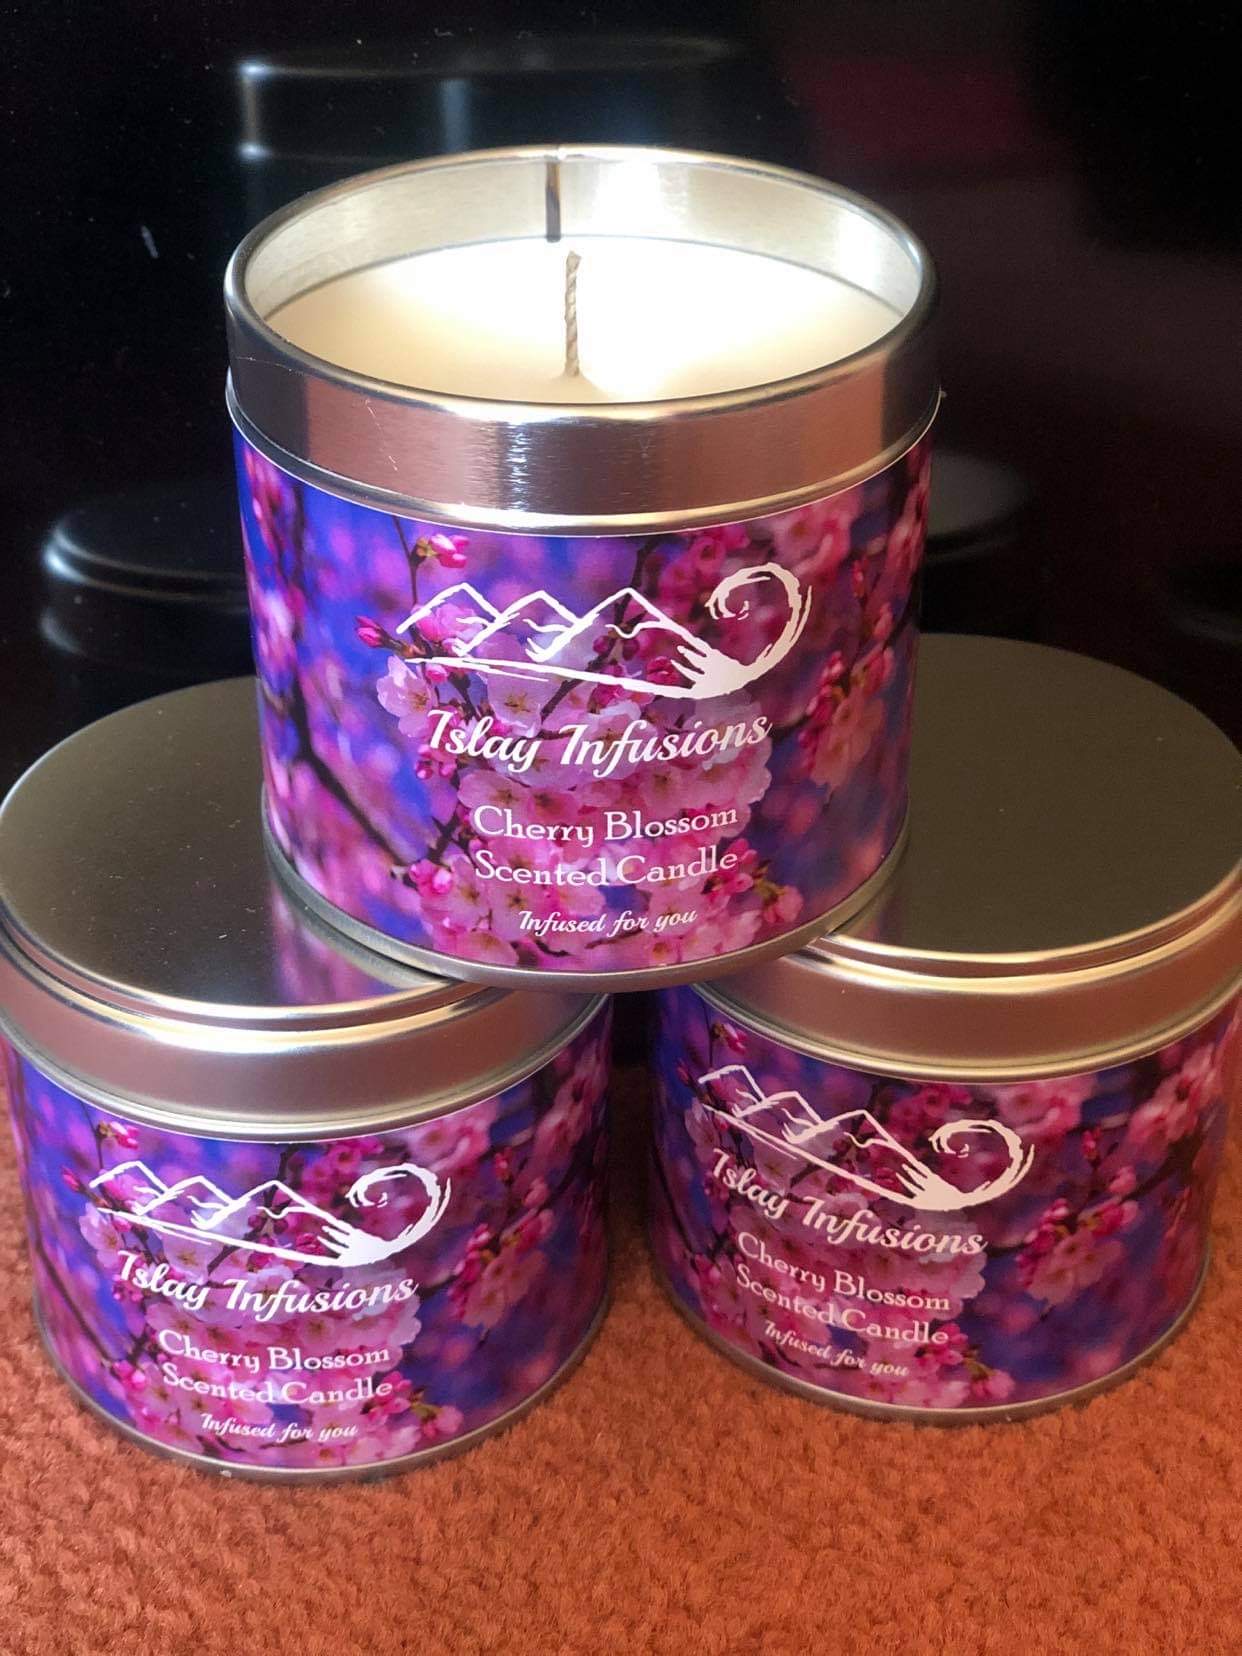 Islay Infusions Cherry Blossom Scented Candle